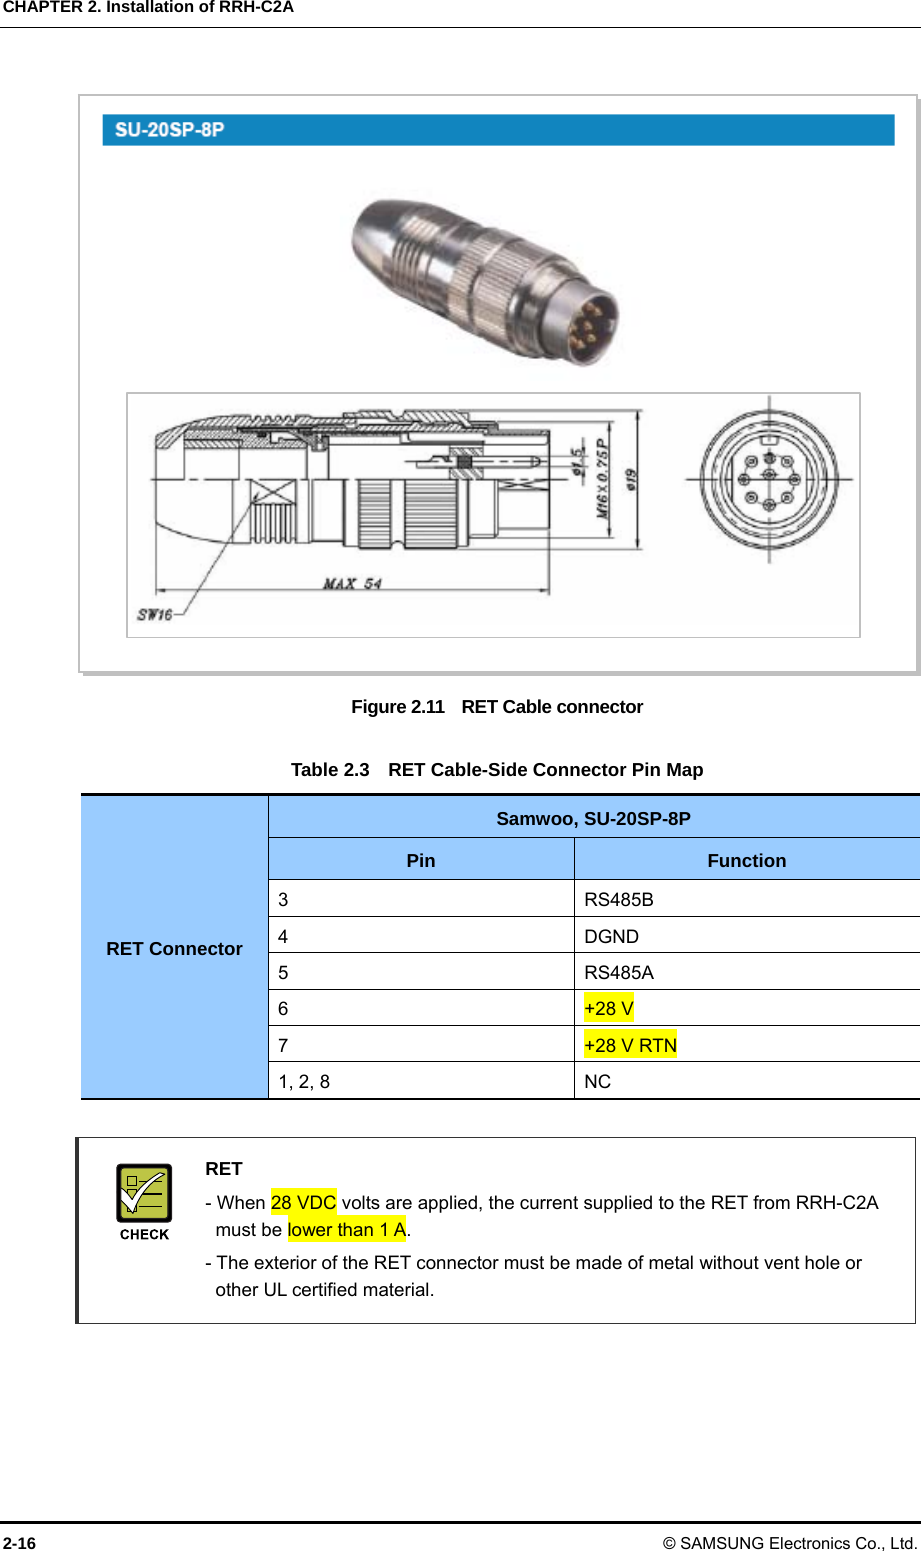 CHAPTER 2. Installation of RRH-C2A 2-16 © SAMSUNG Electronics Co., Ltd.  Figure 2.11    RET Cable connector  Table 2.3    RET Cable-Side Connector Pin Map RET Connector Samwoo, SU-20SP-8P Pin  Function 3 RS485B 4 DGND 5 RS485A 6  +28 V 7  +28 V RTN 1, 2, 8  NC   RET   - When 28 VDC volts are applied, the current supplied to the RET from RRH-C2A   must be lower than 1 A.     - The exterior of the RET connector must be made of metal without vent hole or   other UL certified material.   